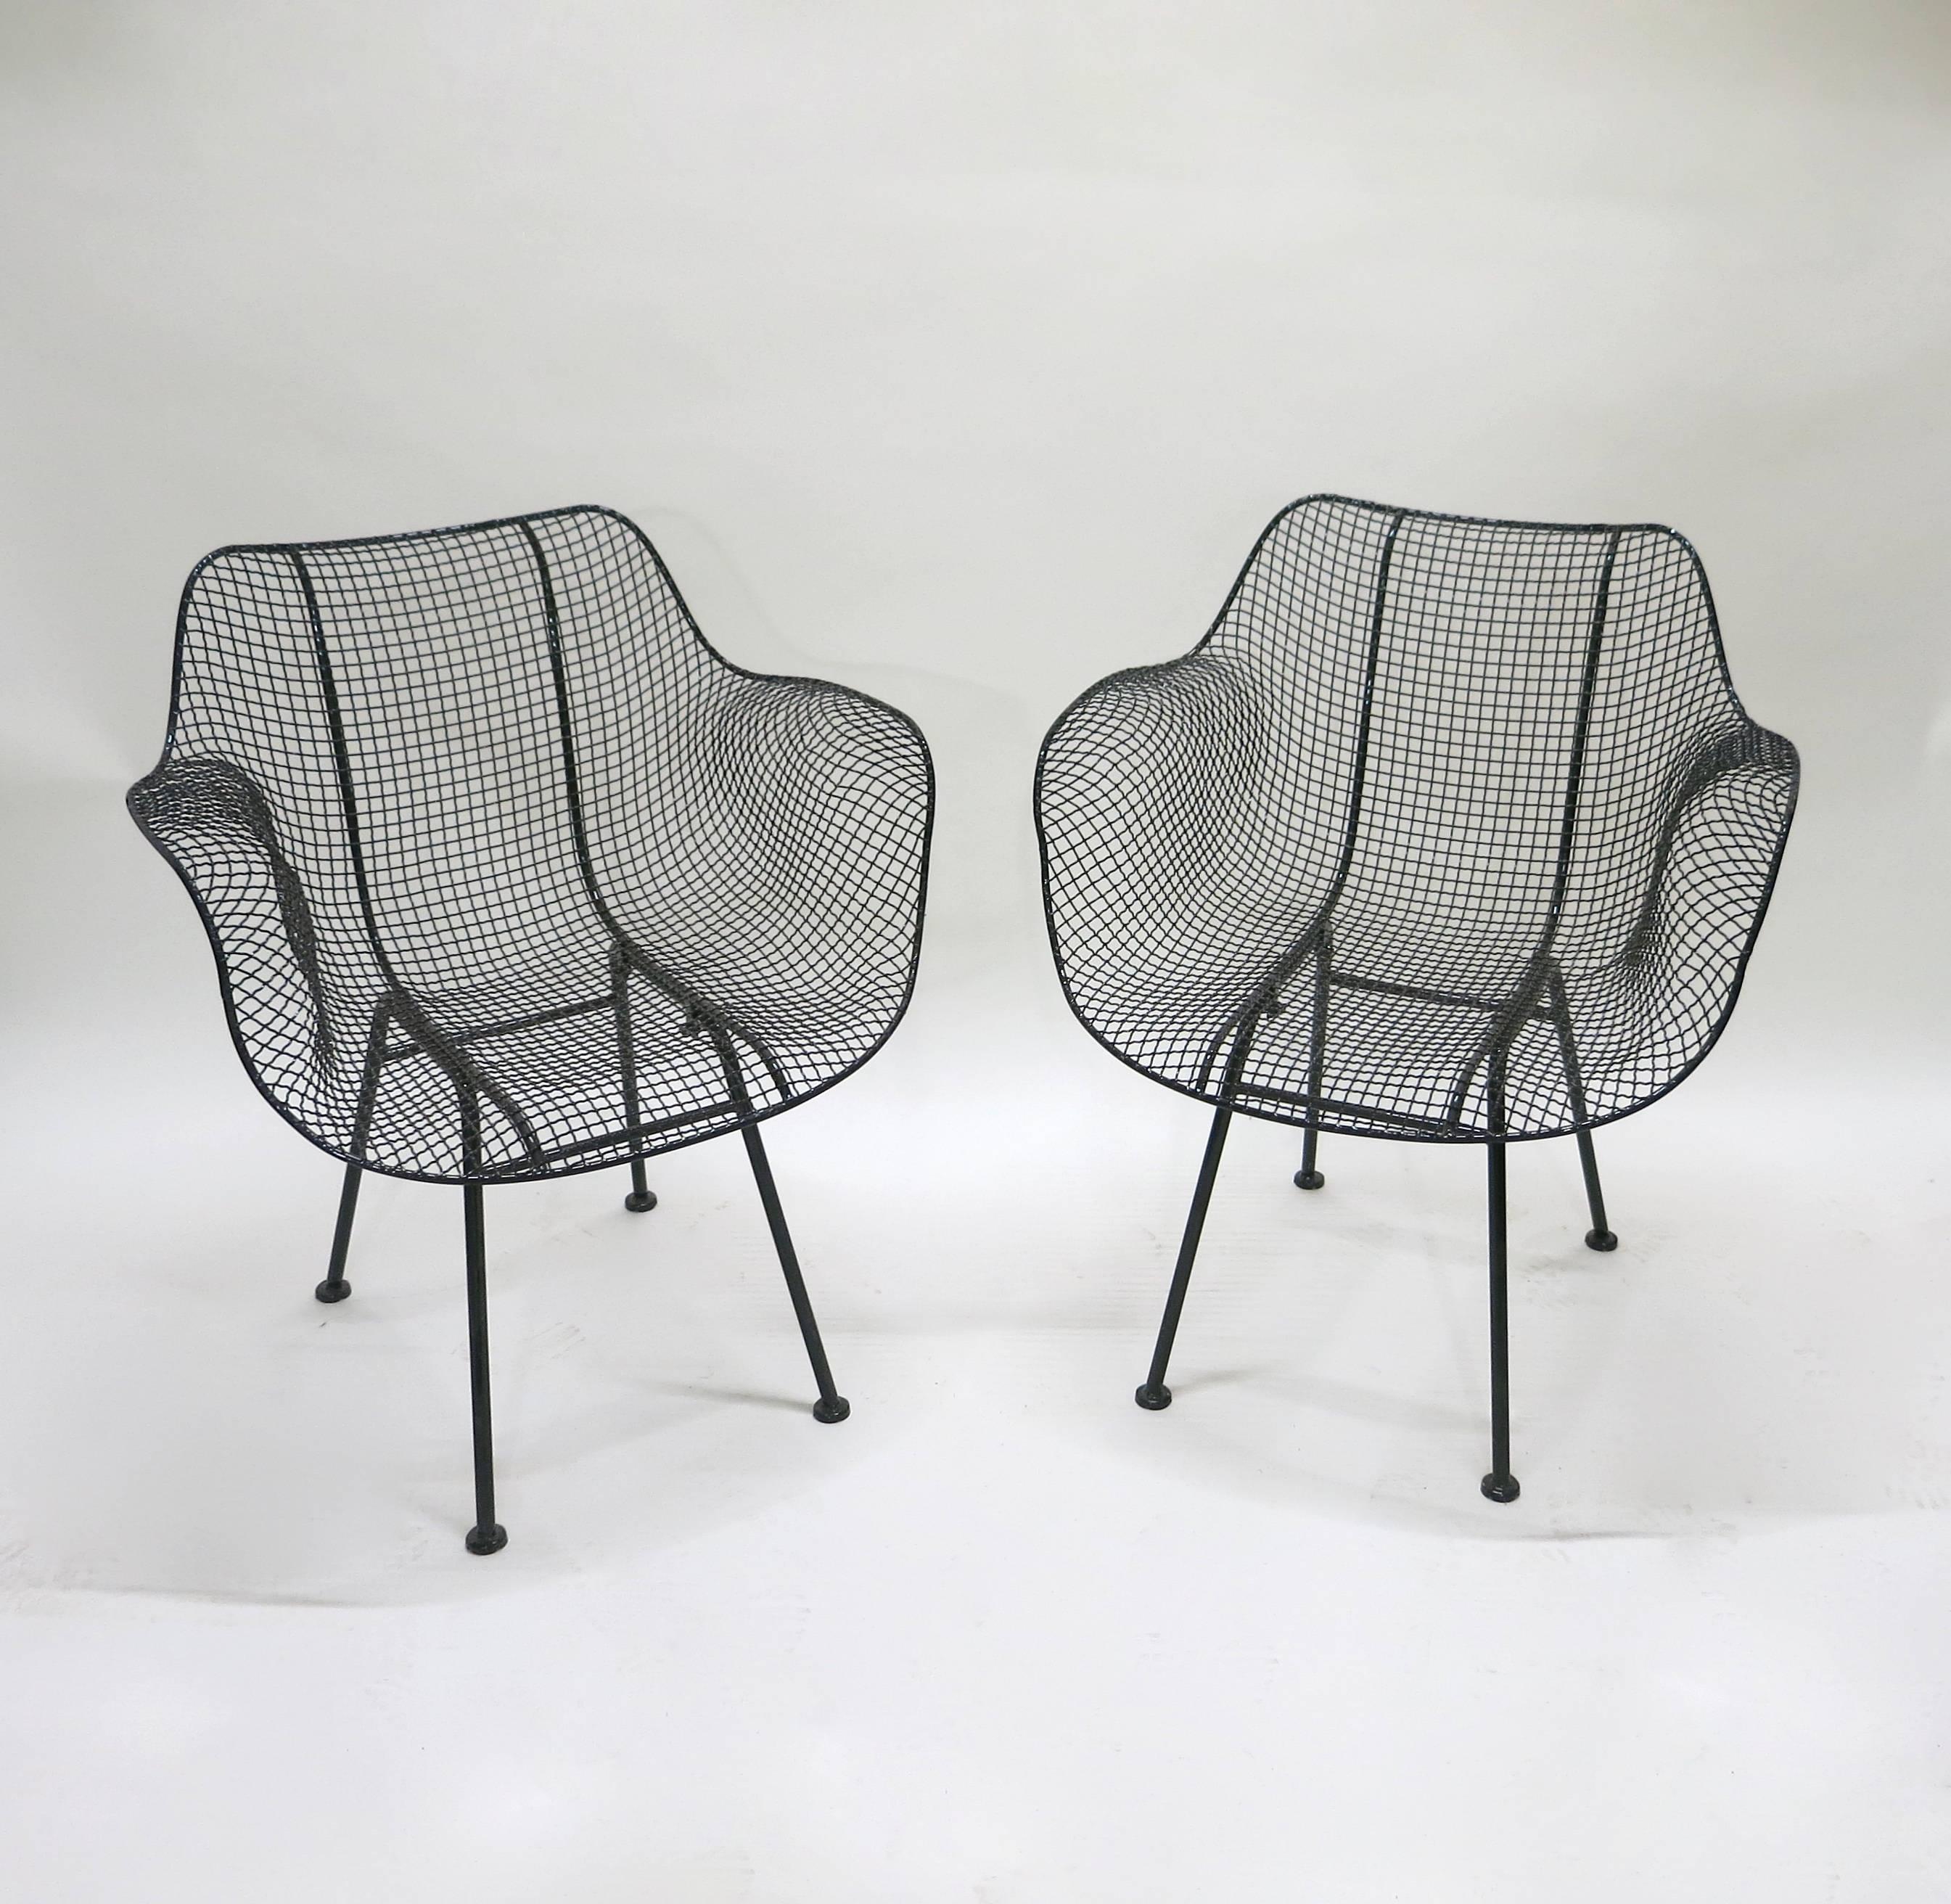 Six vintage dining height armchairs from Woodard's 'Sculpture' line, recently powder coated in a gloss black finish and all in excellent condition. Indoor and outdoor use.